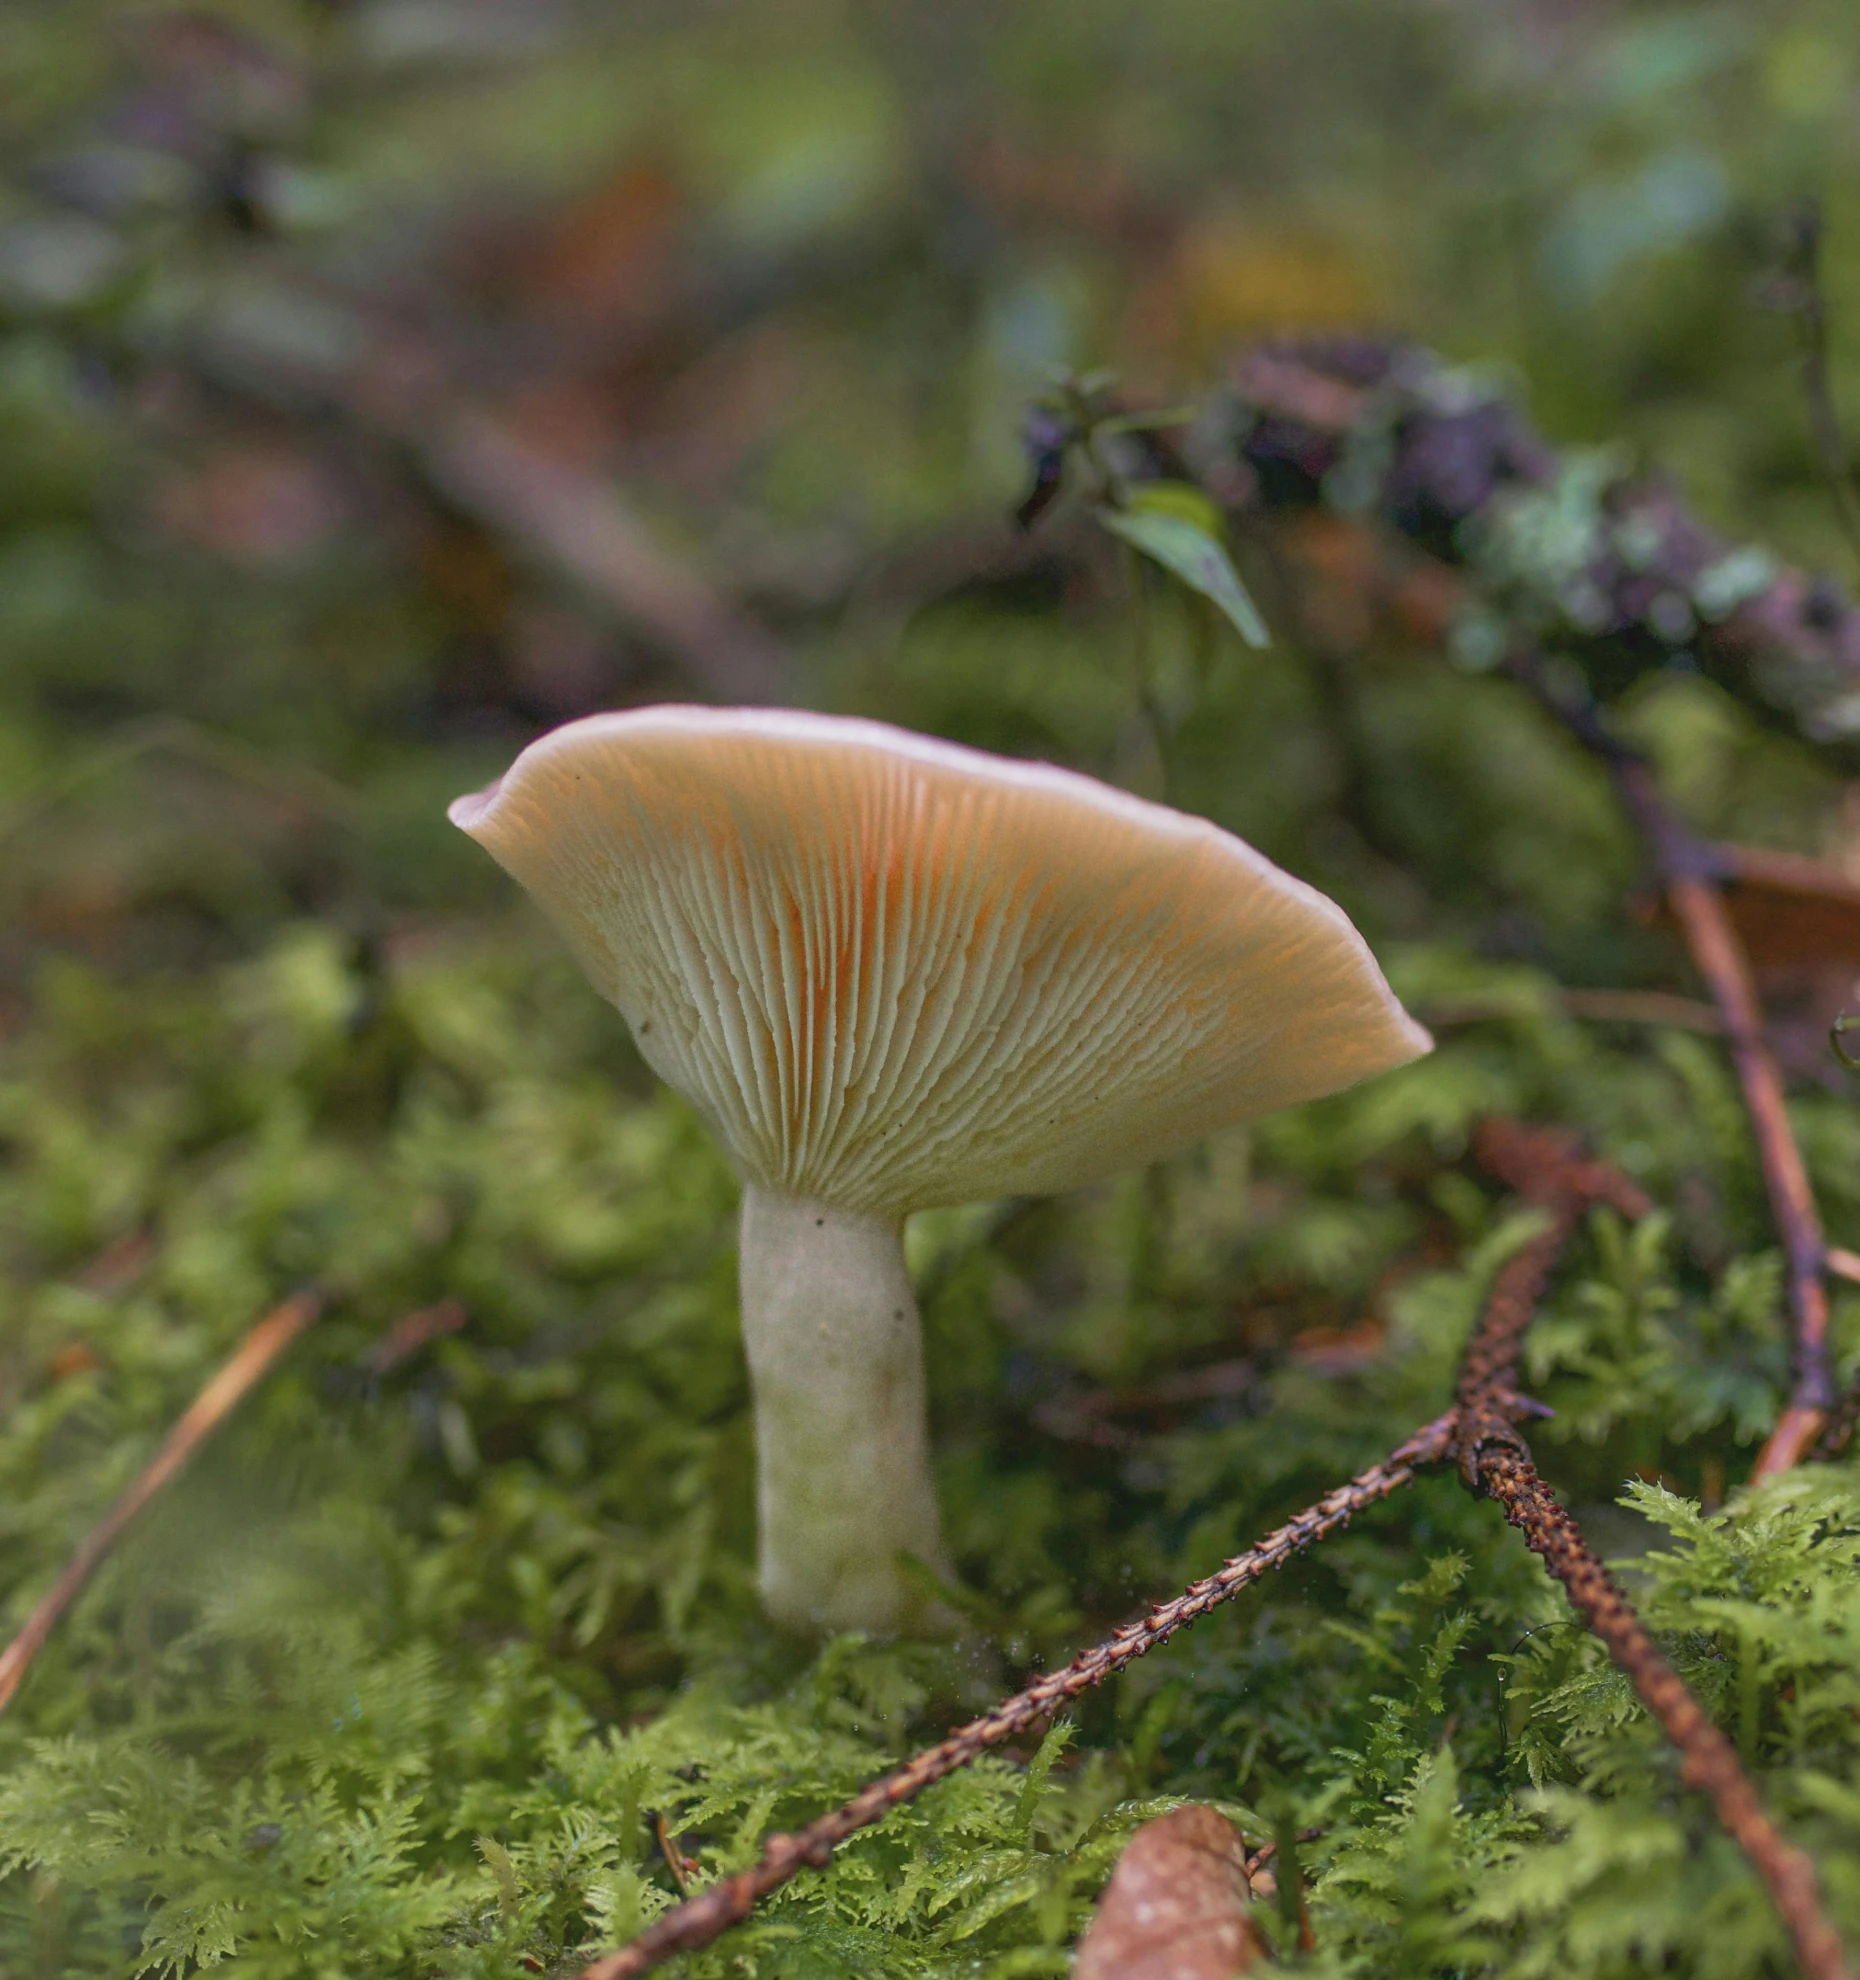 this po is taken in the woods, showing a mushroom on the moss